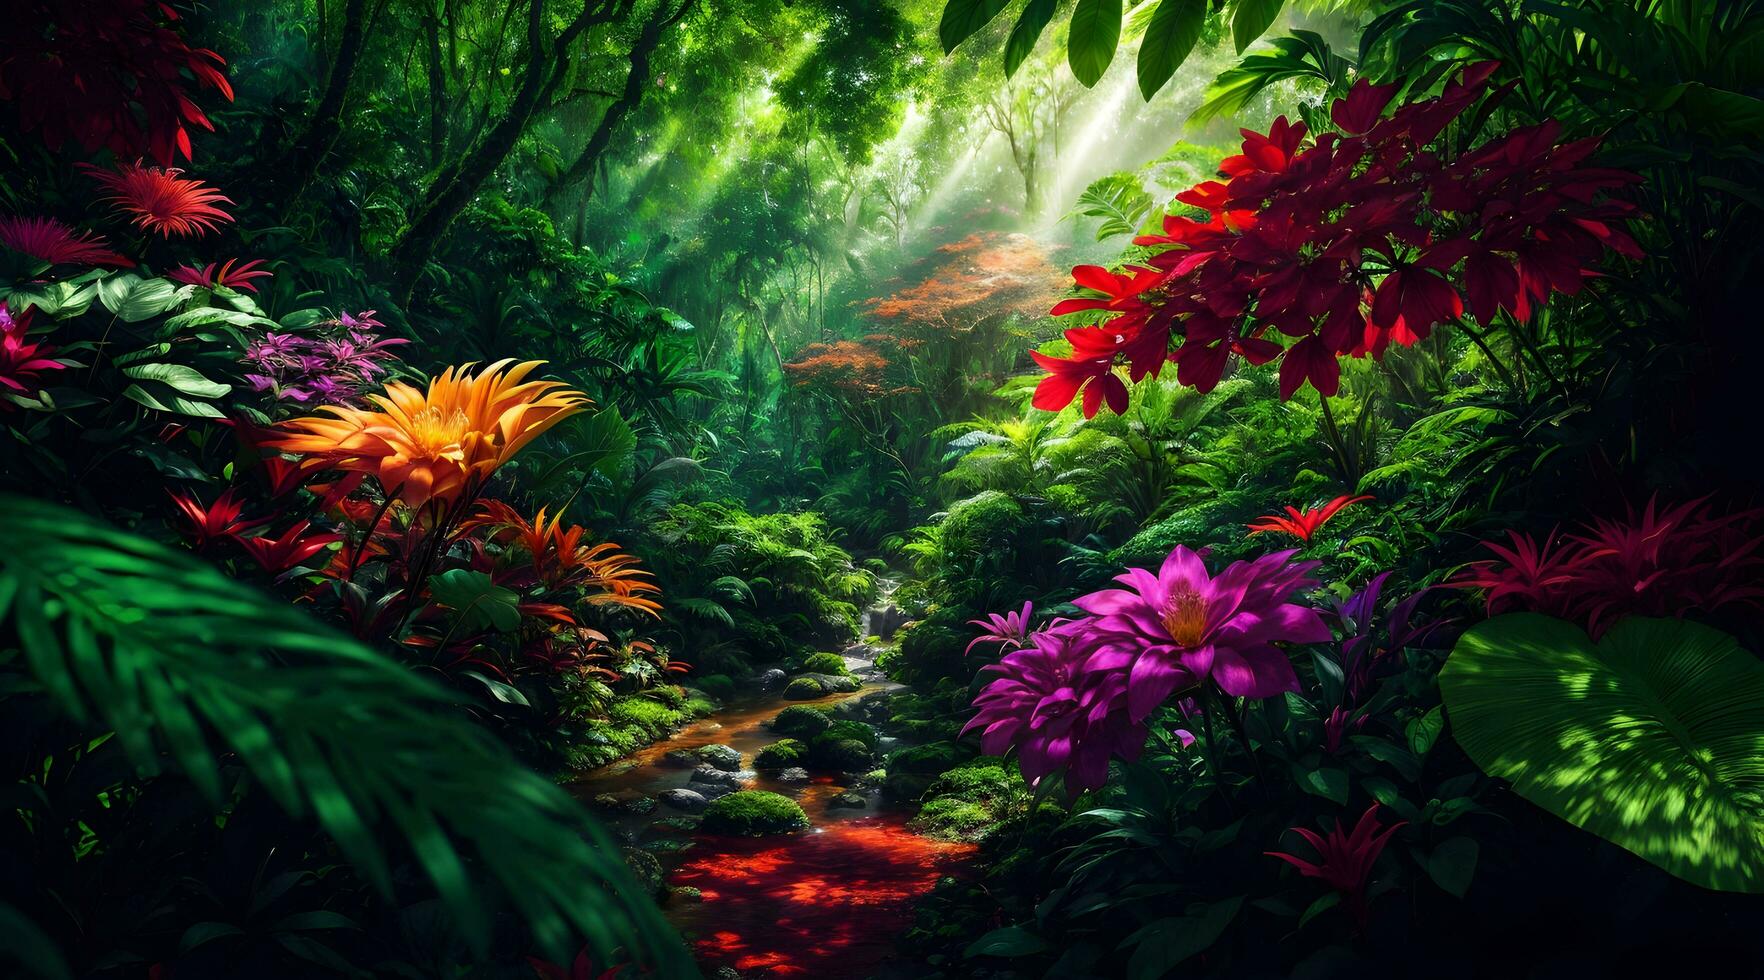 3D digital painting of a tropical rainforest with a stream and colorful flowers - Jungle